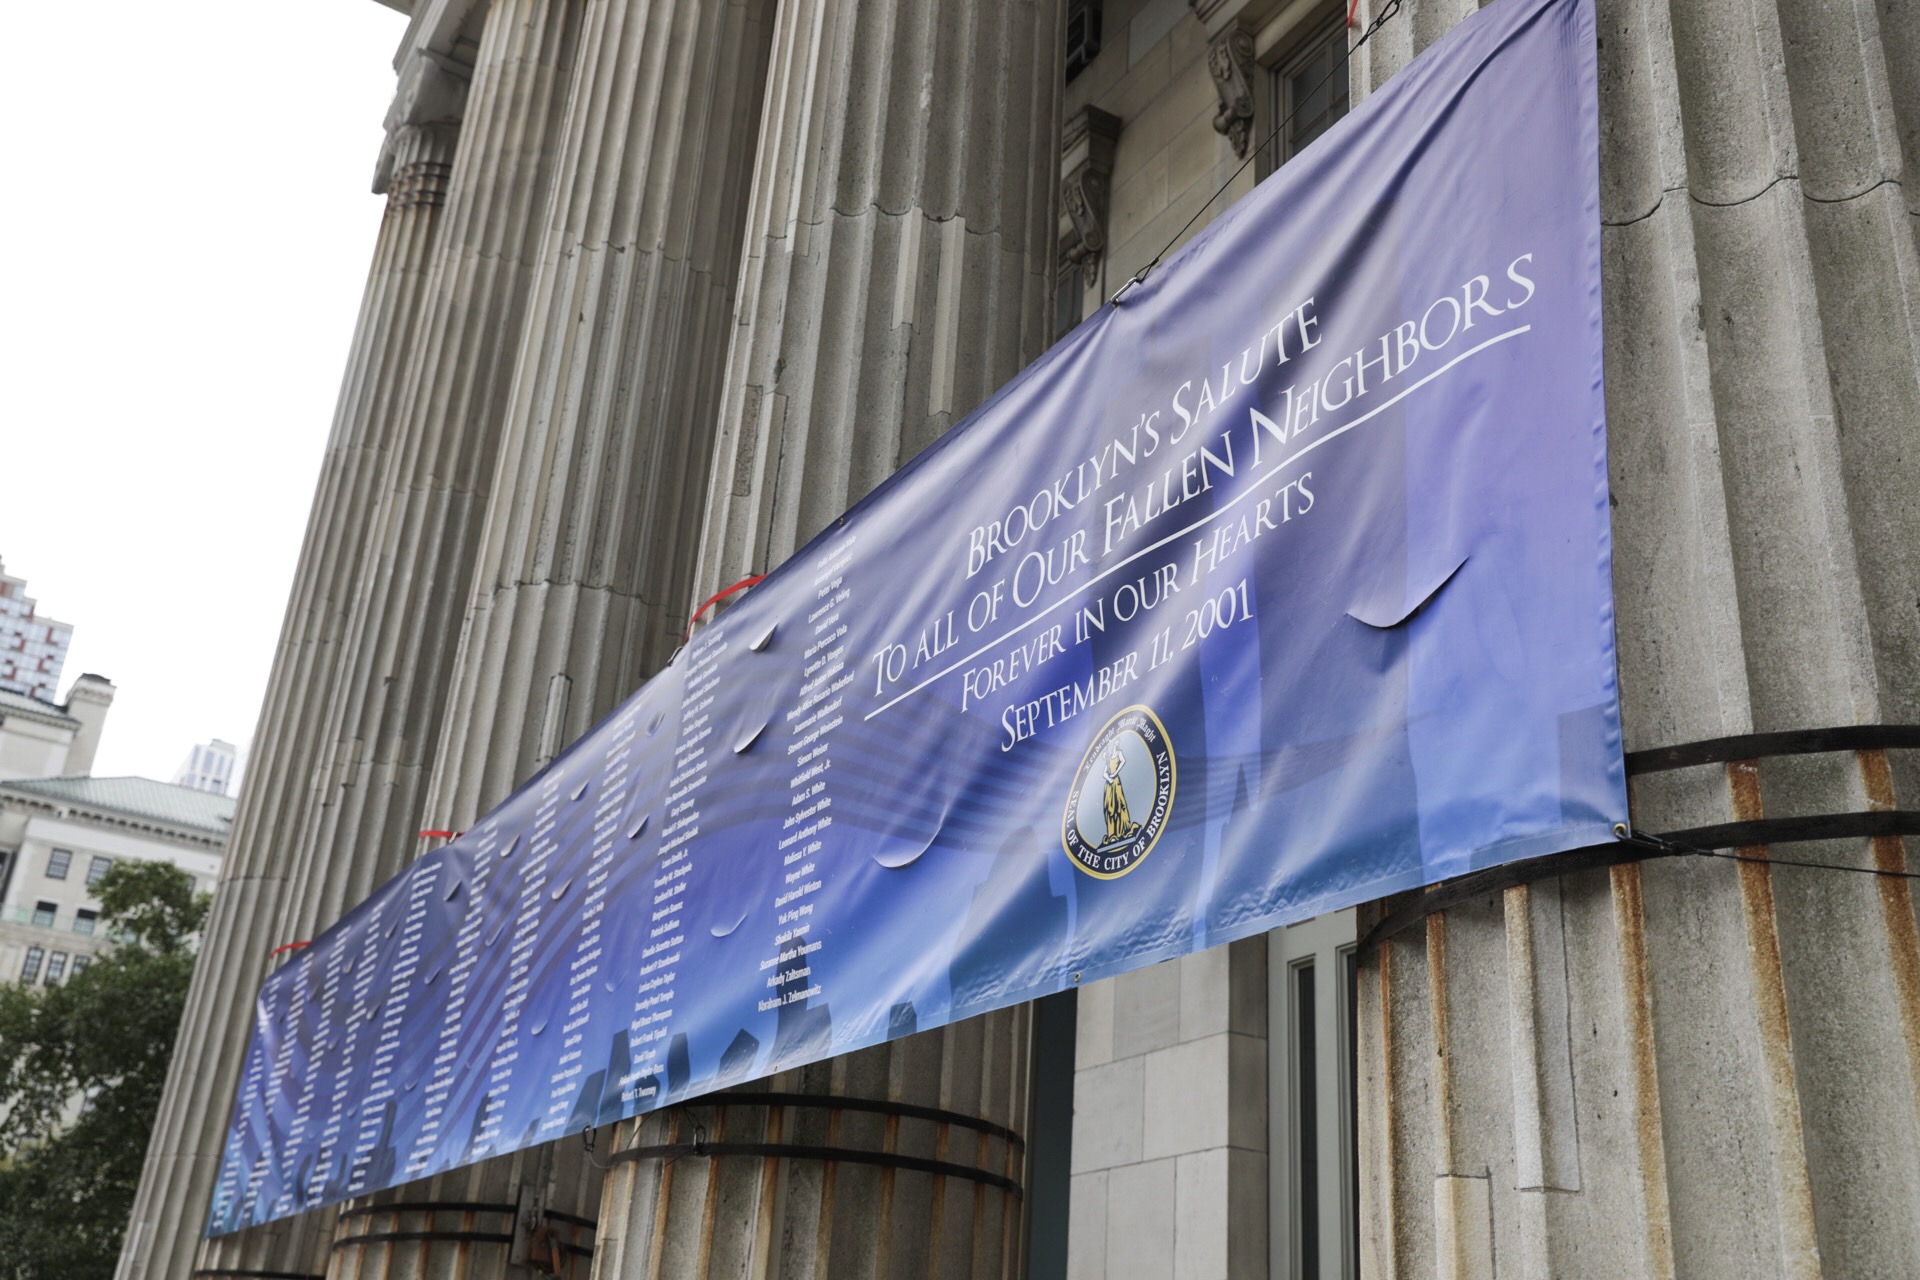 A banner outside Borough Hall lists the names of all 266 Brooklyn residents who perished in the Sept. 11, 2001 attacks. Eagle photo by Paul Frangipane